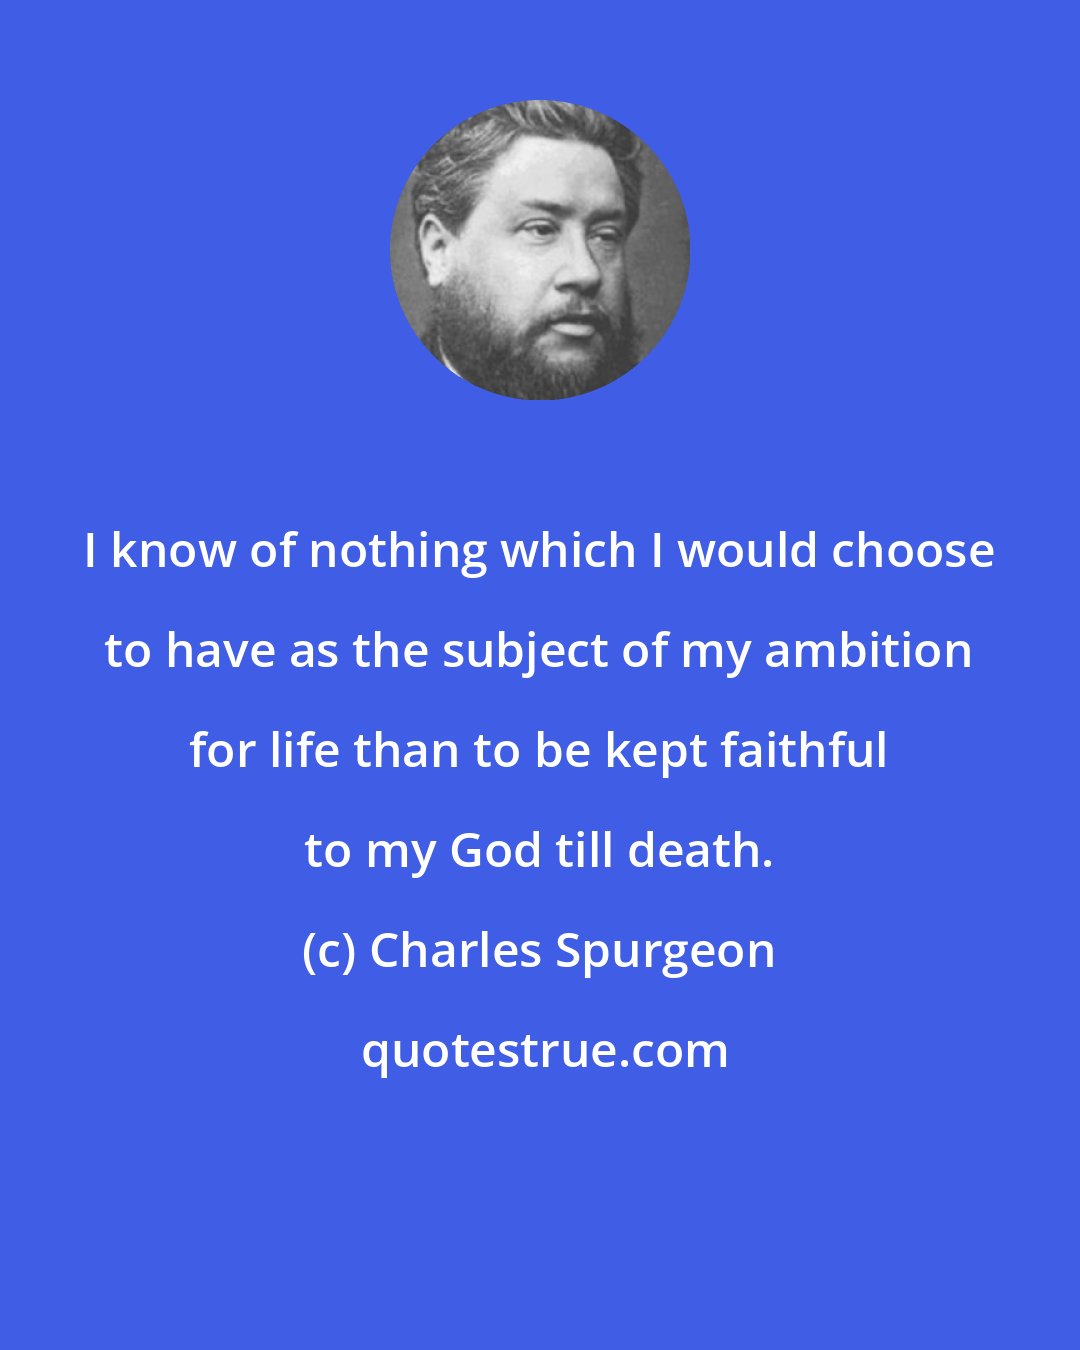 Charles Spurgeon: I know of nothing which I would choose to have as the subject of my ambition for life than to be kept faithful to my God till death.